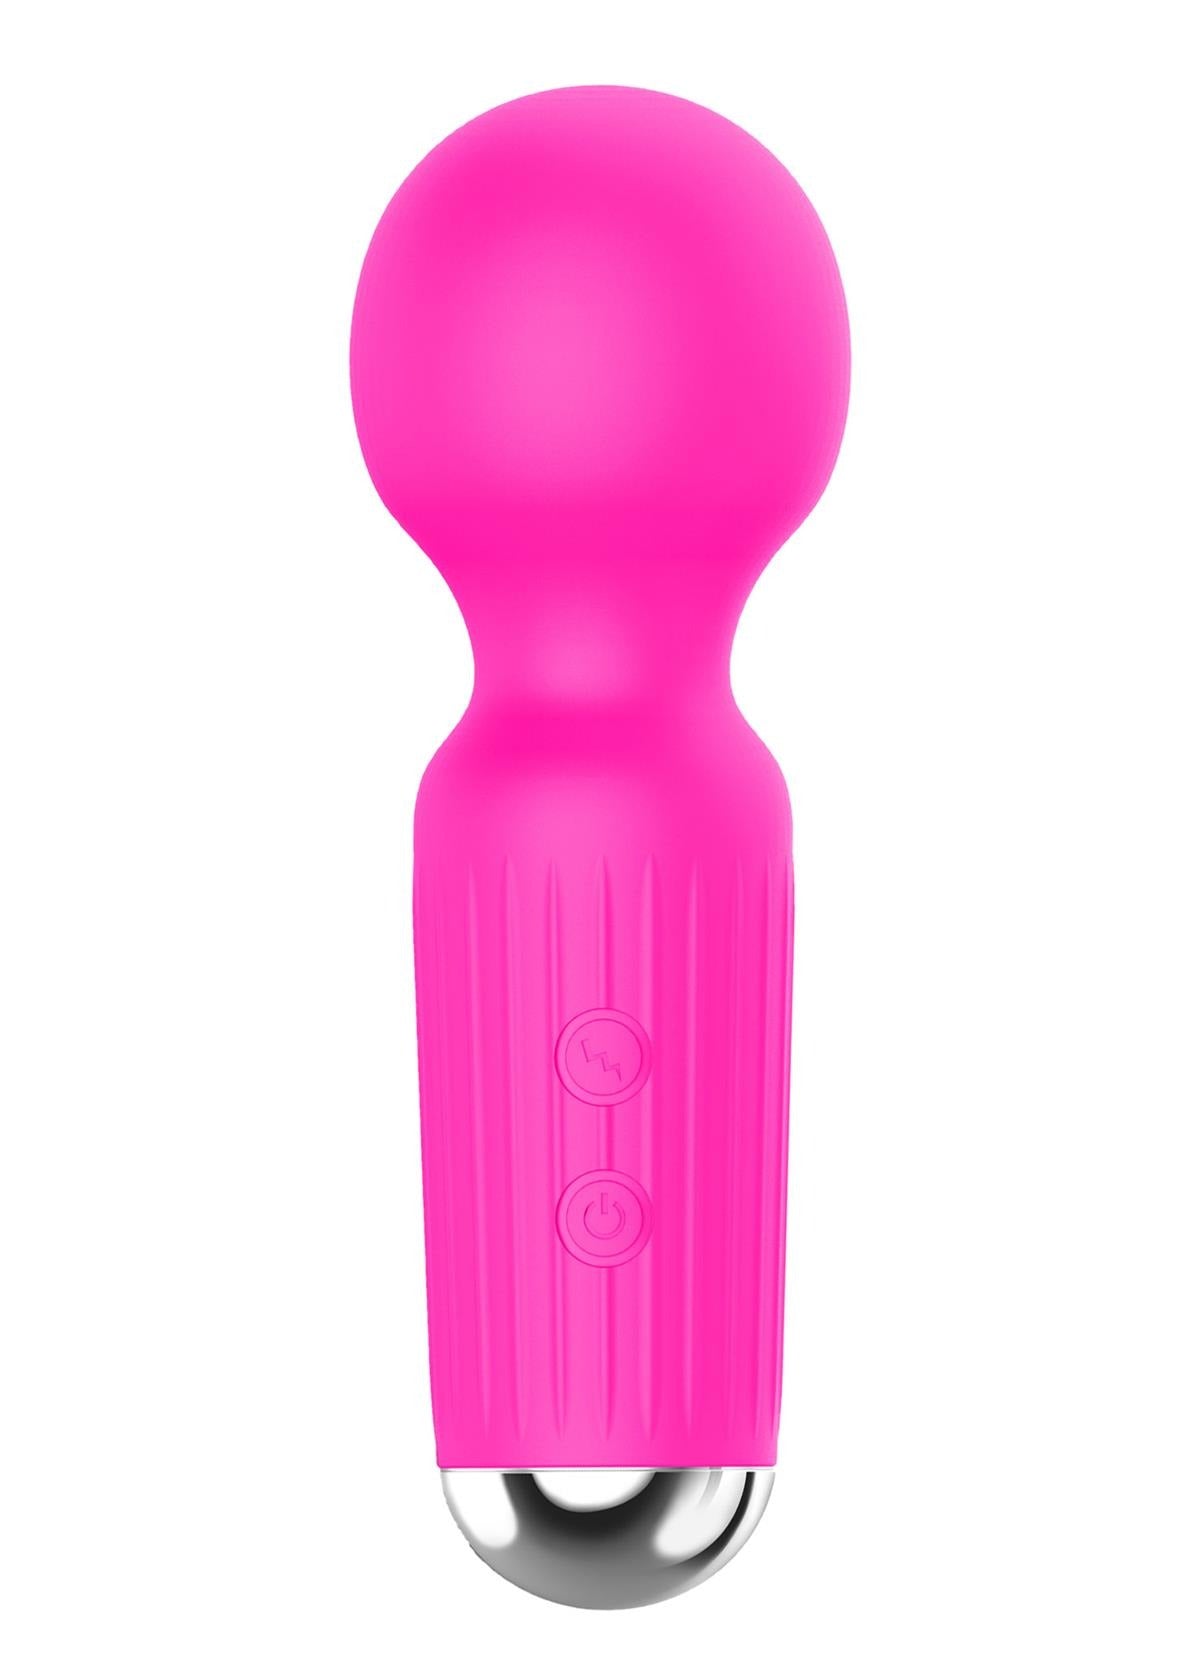 Bossoftoys - 22-00039 - Mini Massager vibrator - 20 Functions - Silicone - 11 cm -  dia 3,7 cm - Rechargeable - attractive Colour windowbox - Pink